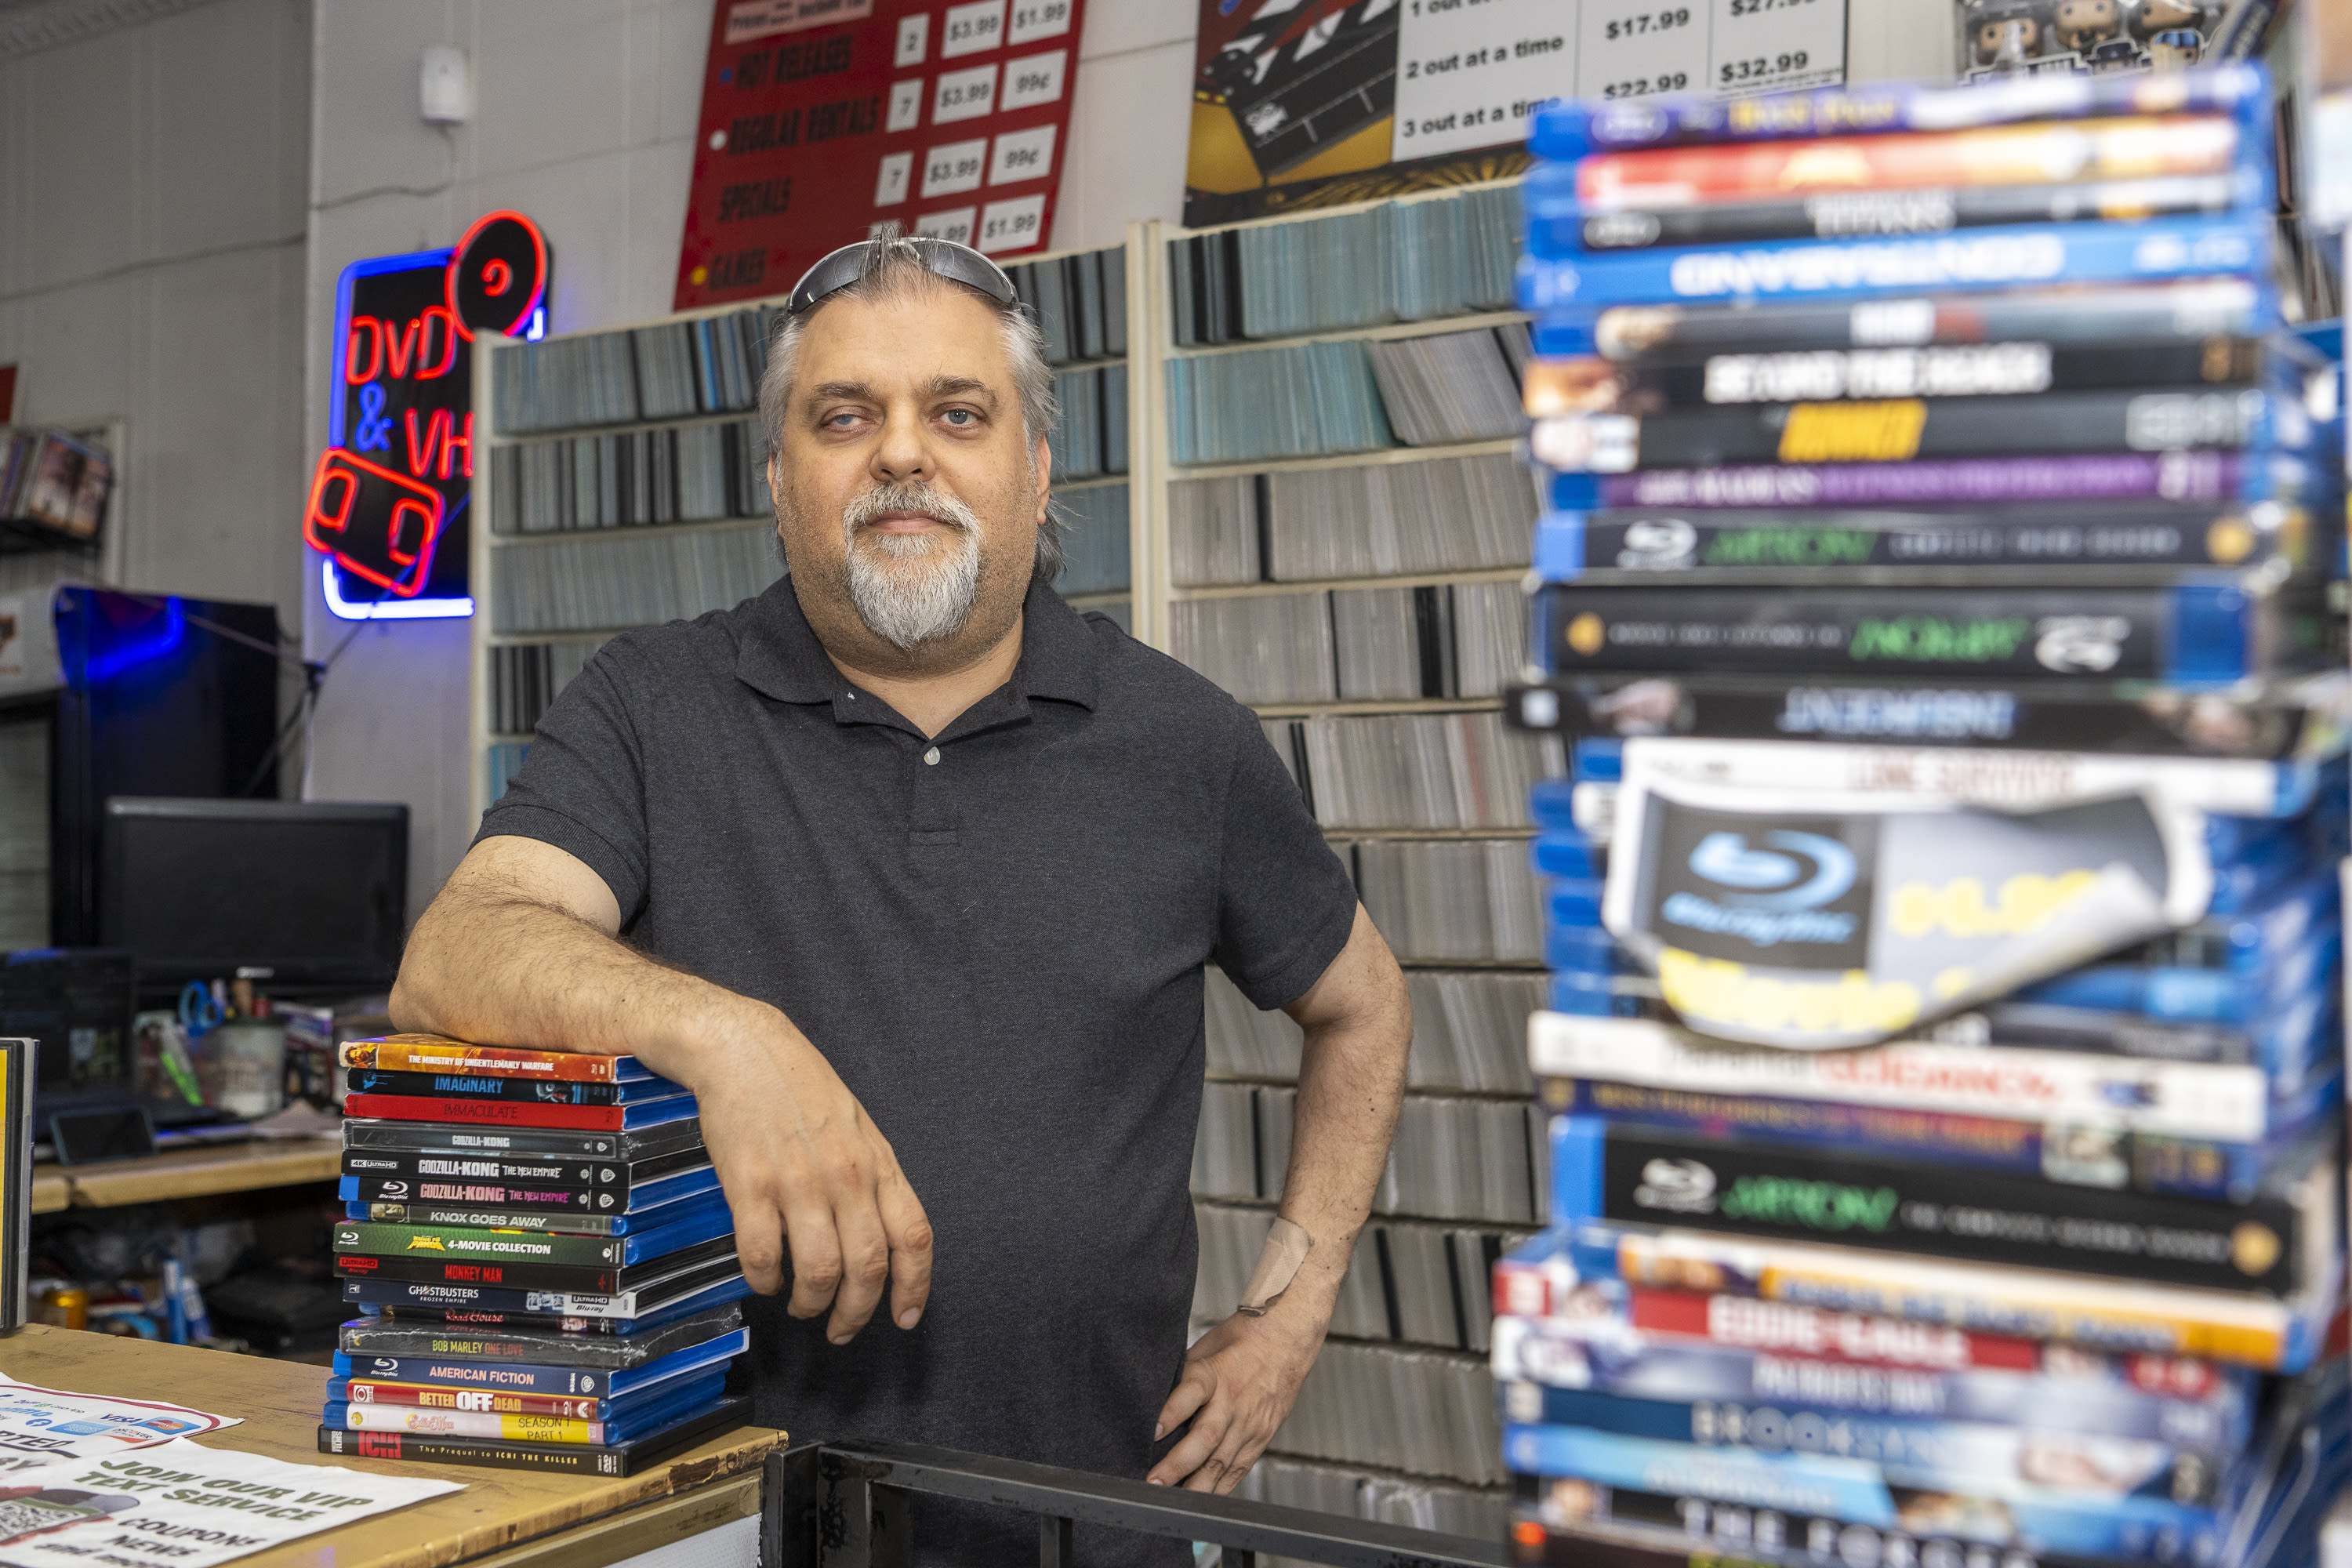 A vestige of the video era: Human touch helps Chicago movie rental shop live on in age of streaming